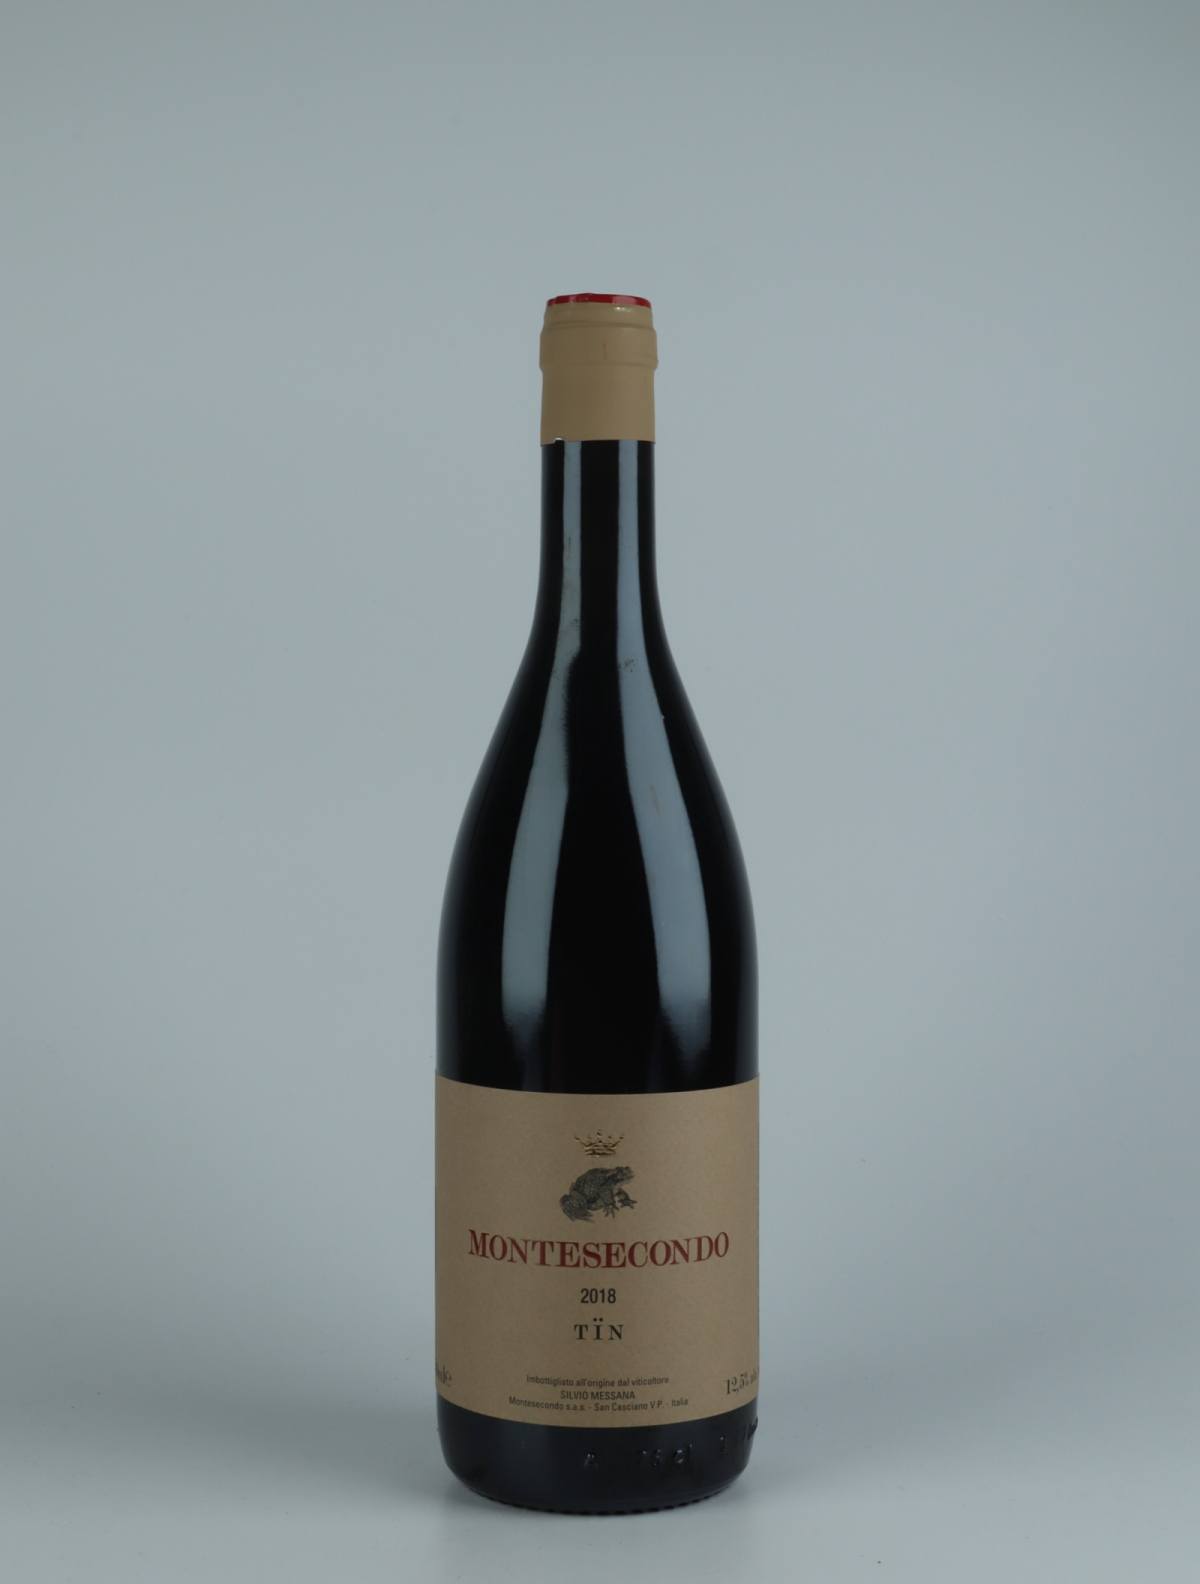 A bottle 2018 Tïn - Sangiovese Red wine from Montesecondo, Tuscany in Italy